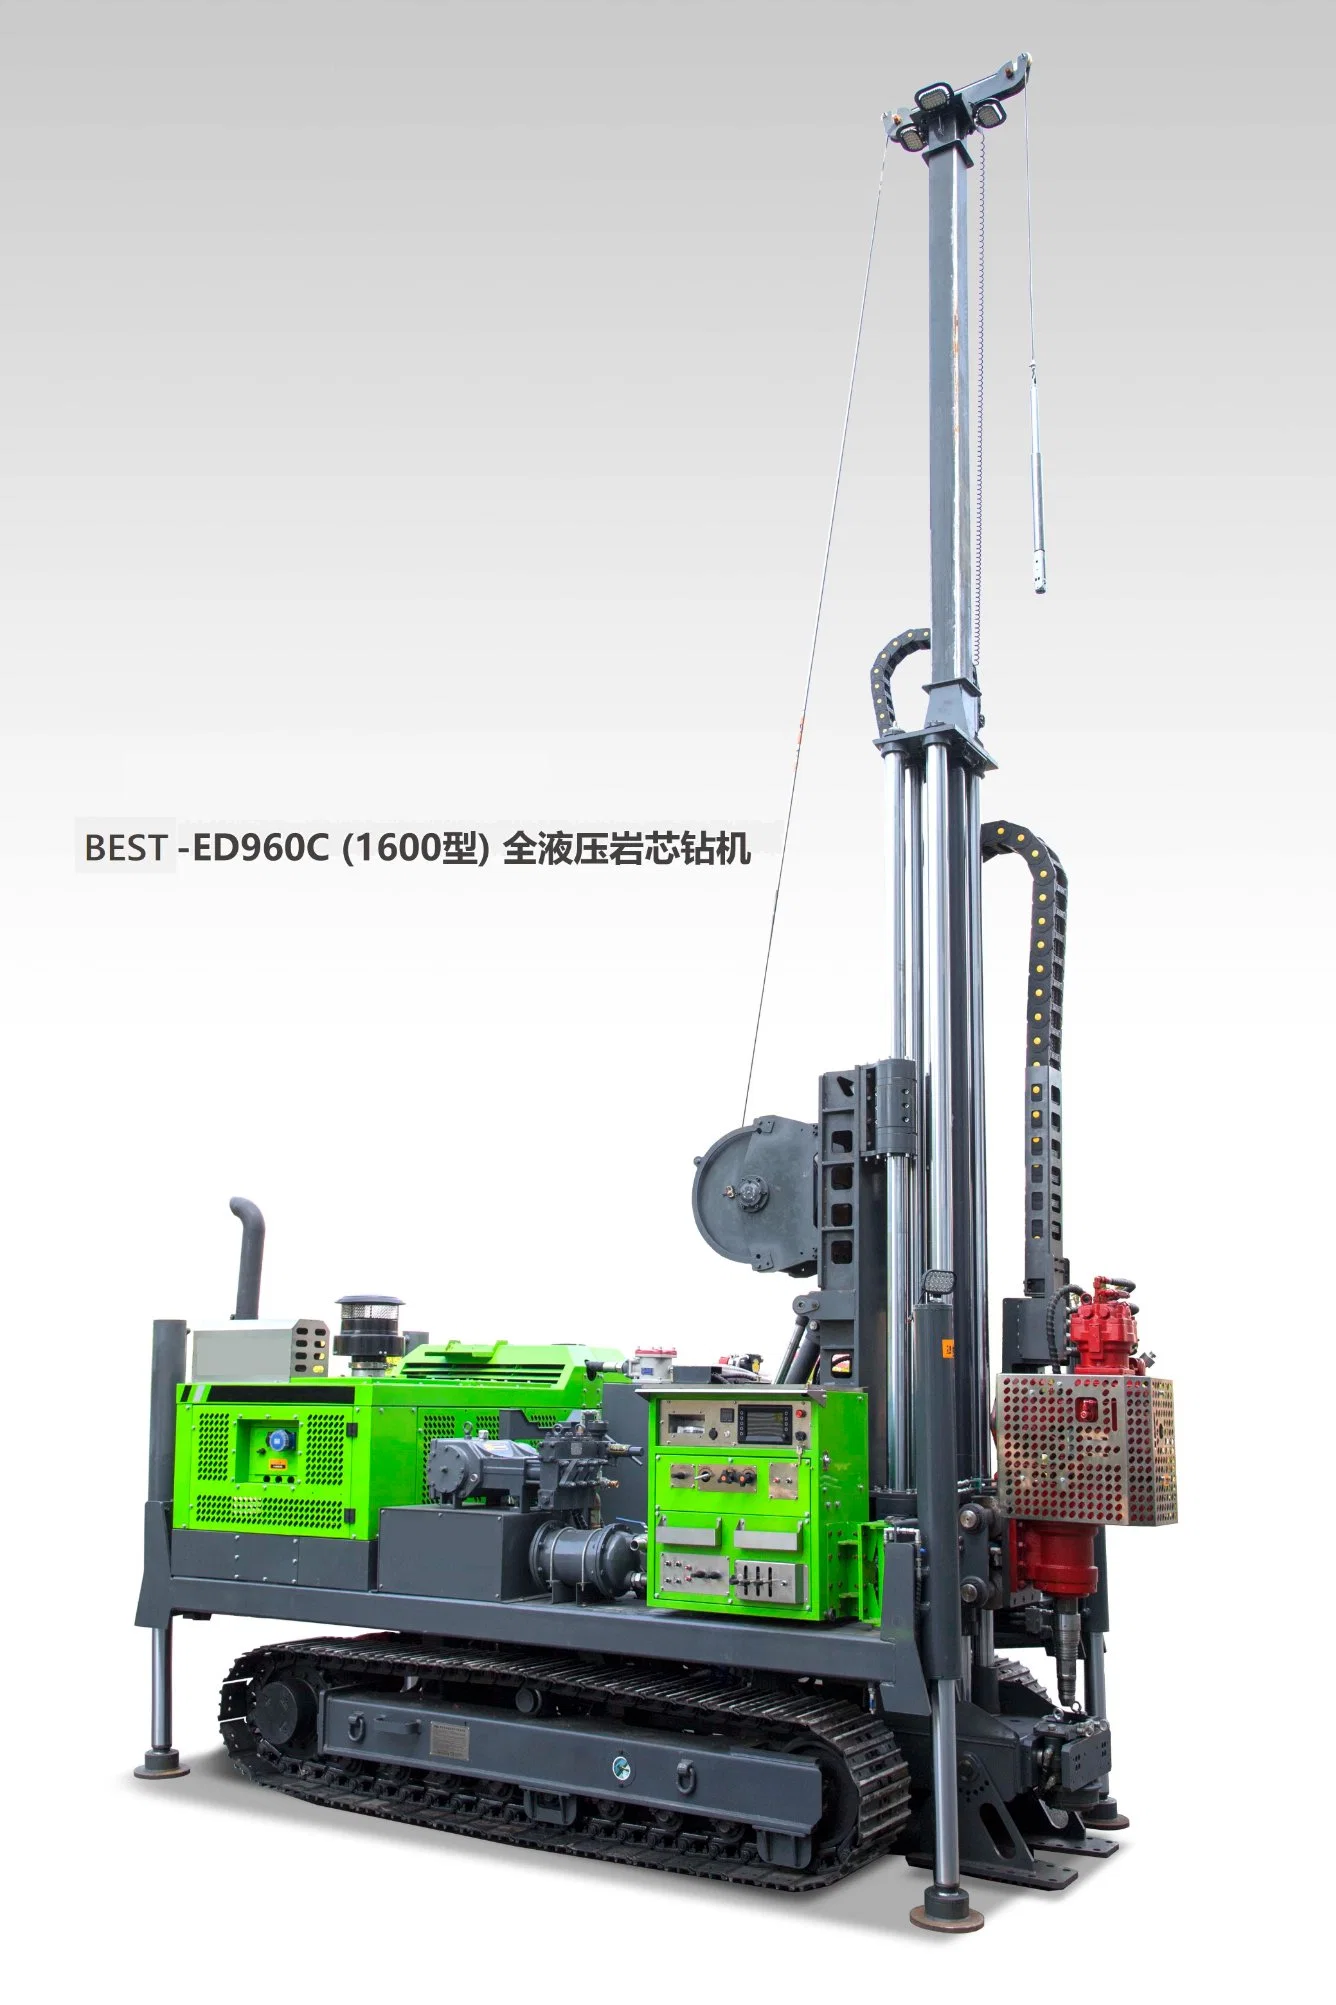 Durable Full Hydraulic Drill Rig Best-ED960c Core Drill Rig for Geological Exploration Drilling